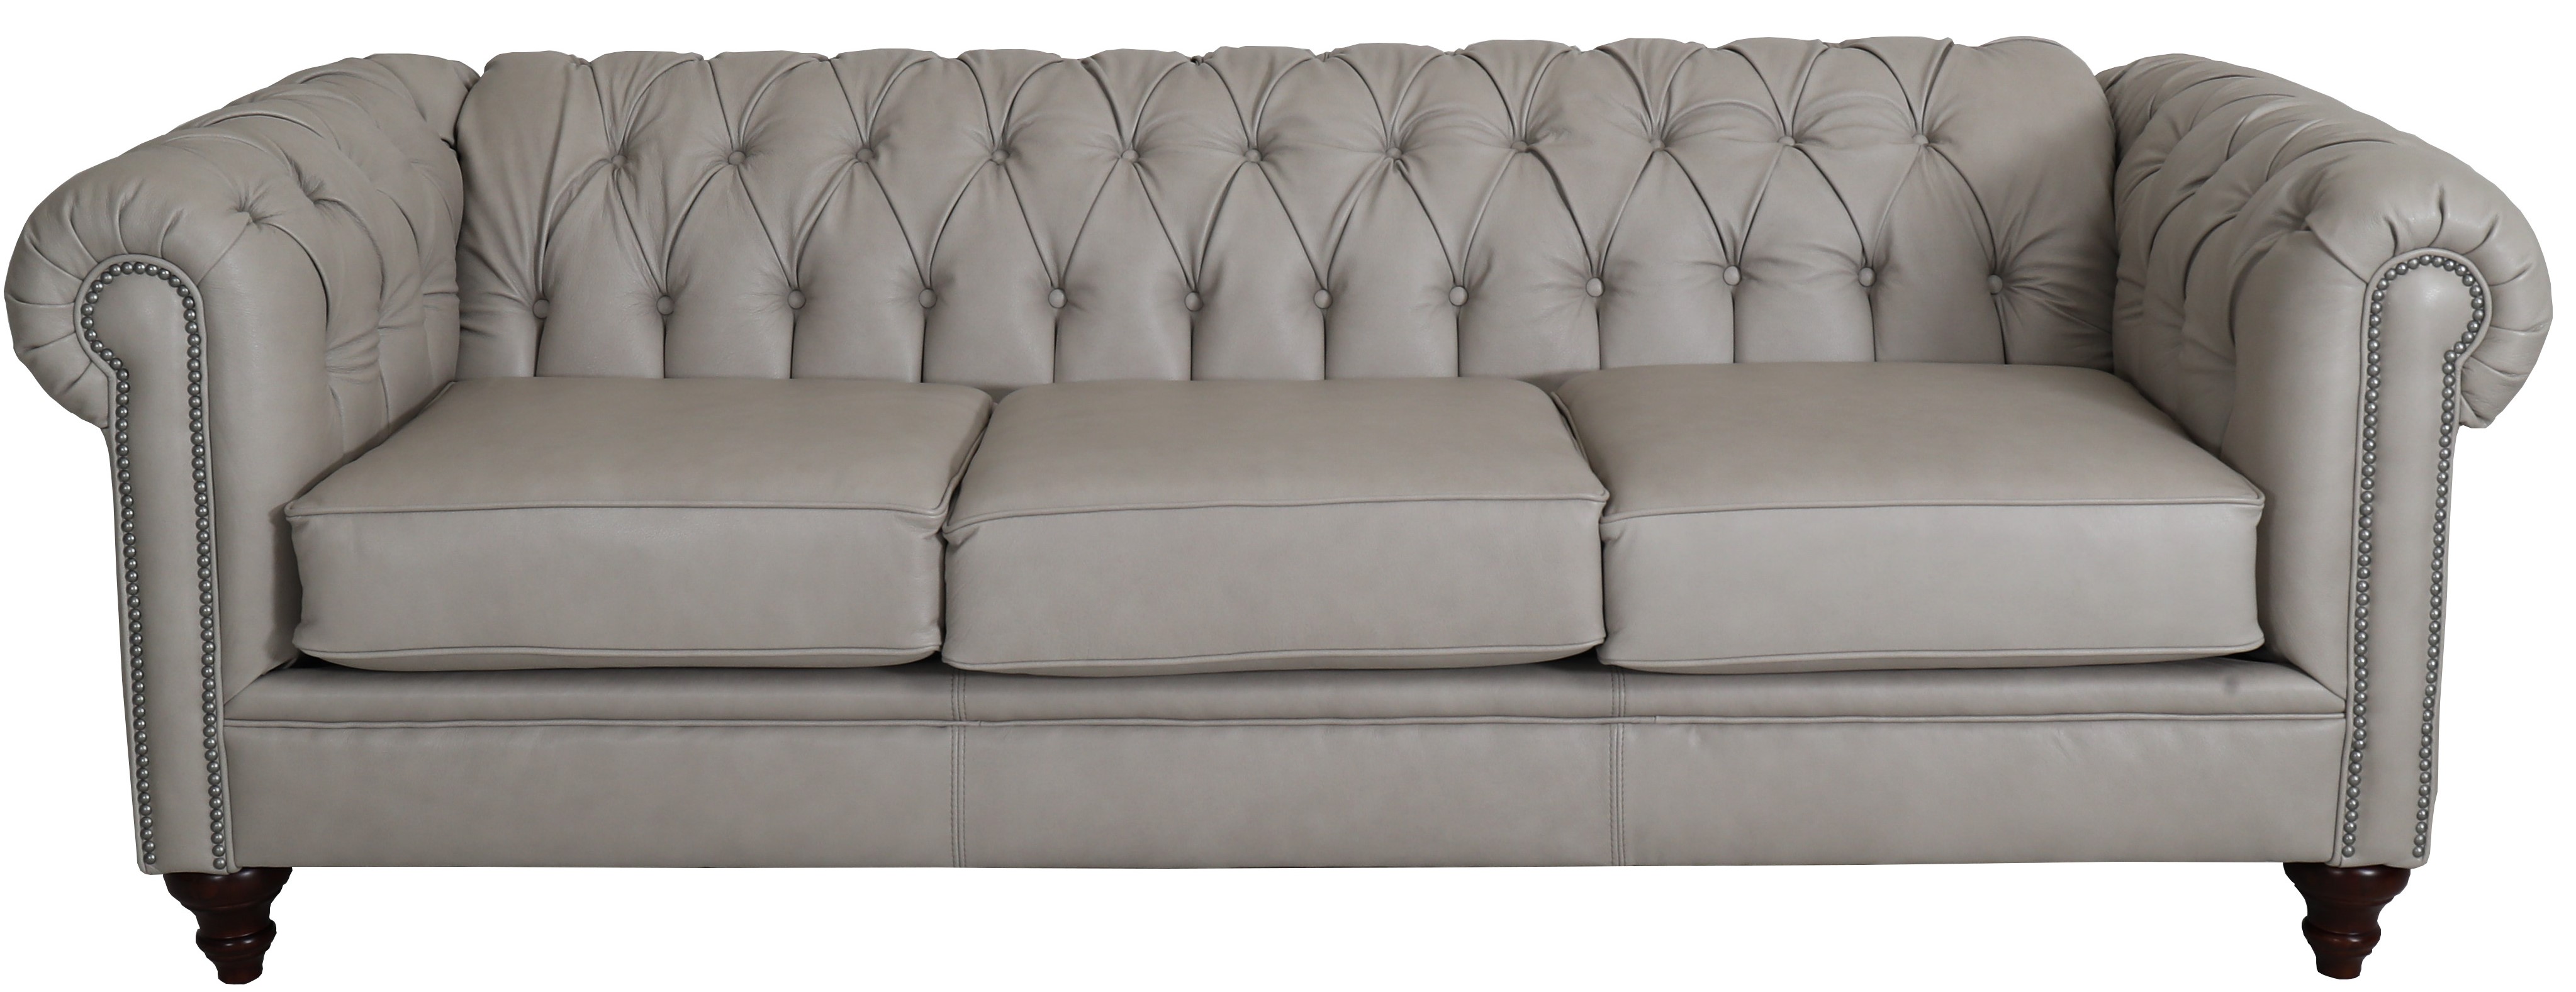 Chesterfield Sofa Dupe